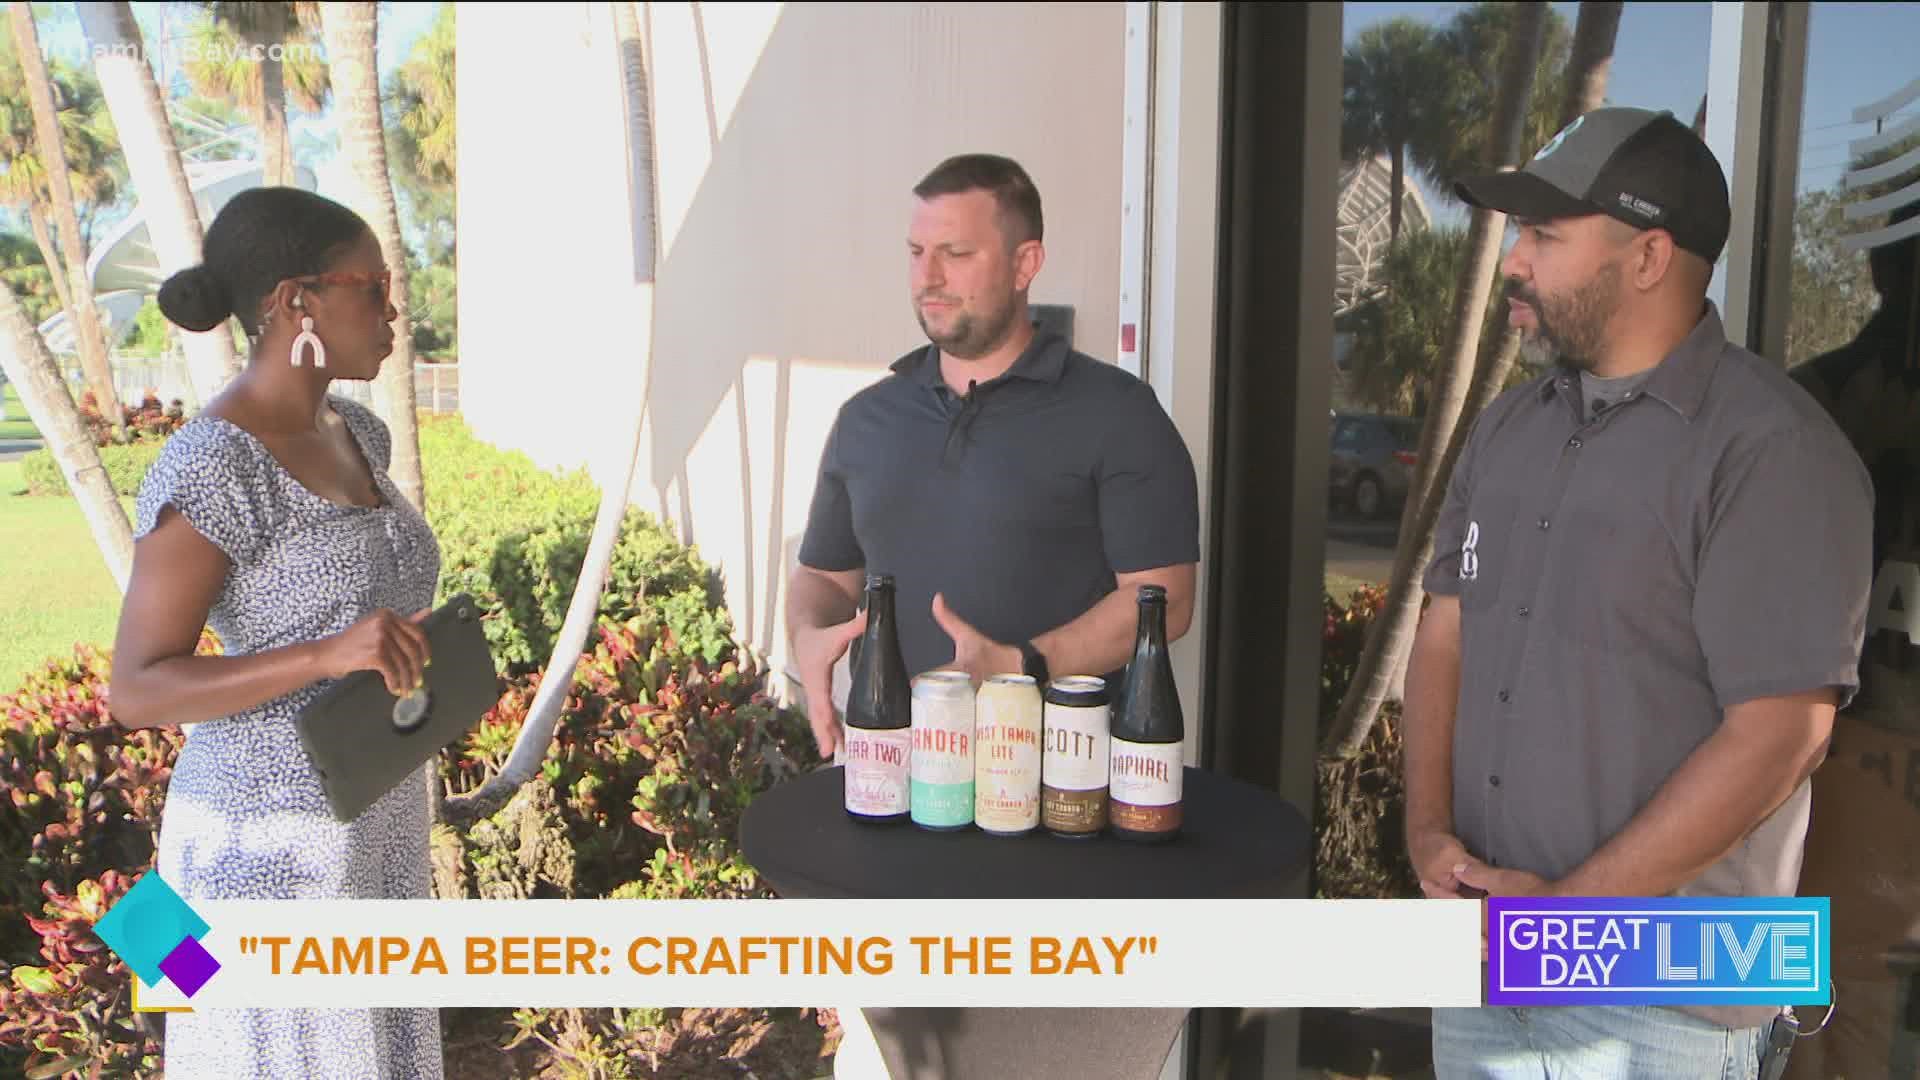 "Tampa Beer: Crafting The Bay"